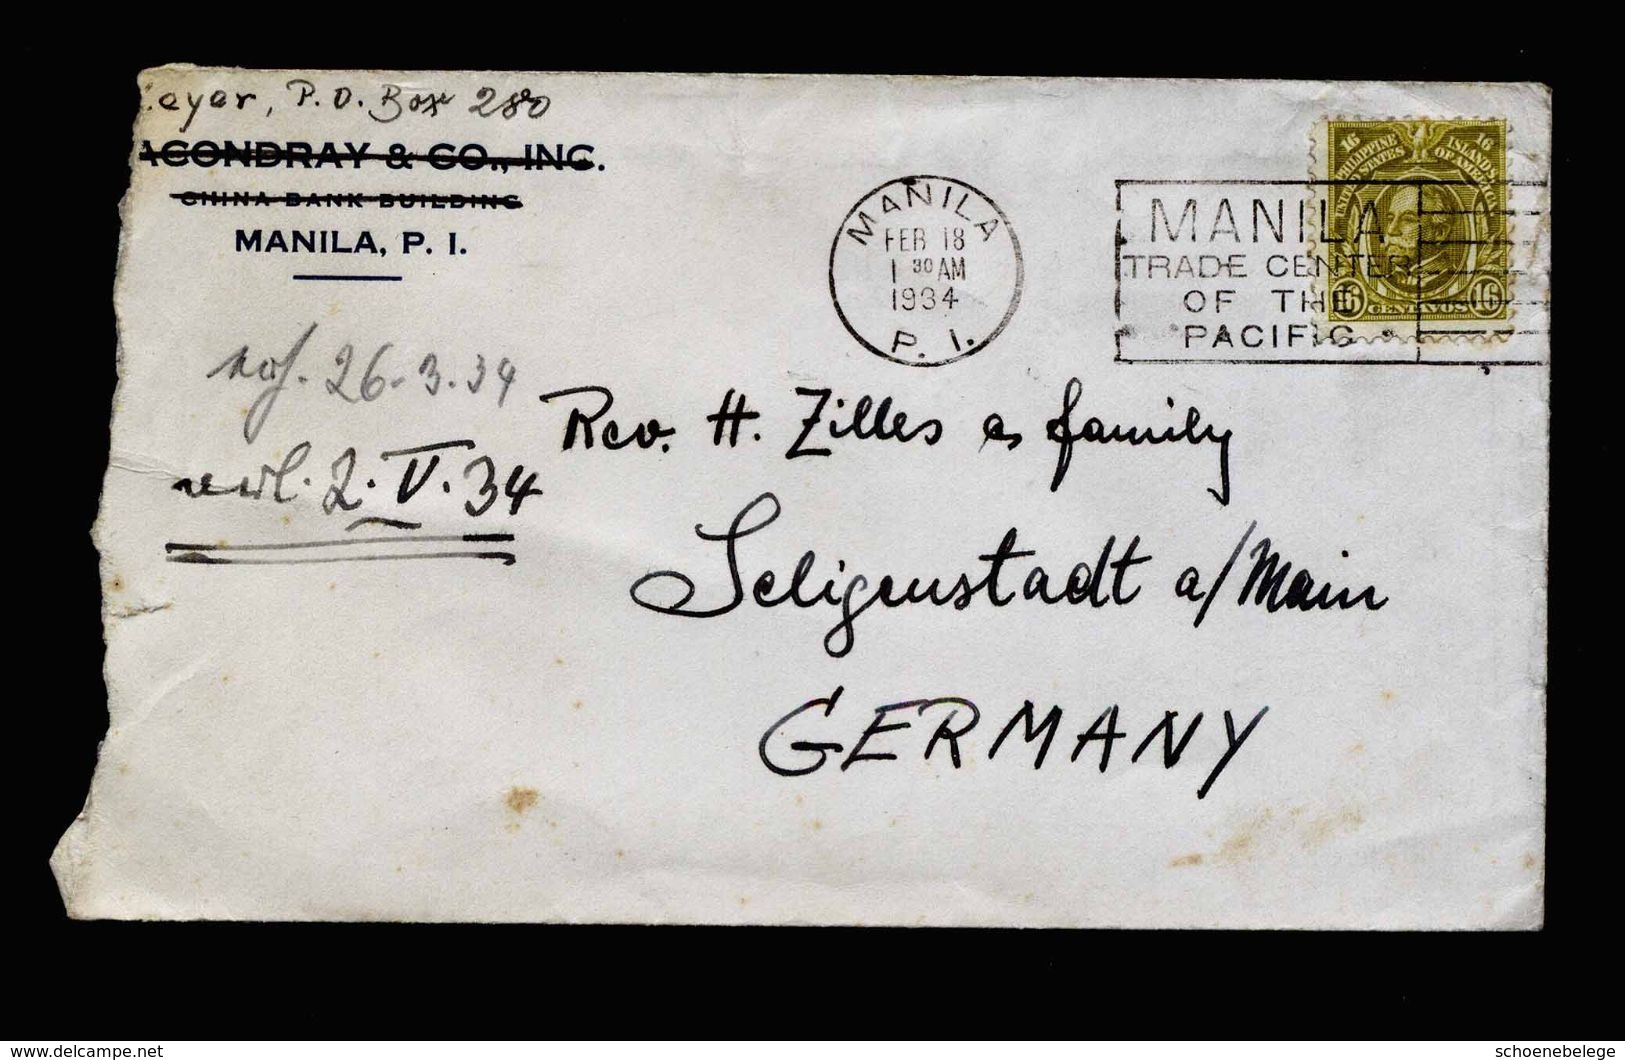 A5141) US Philipppines Cover Manila 02/18/34 With 16c To Germany - Philippinen